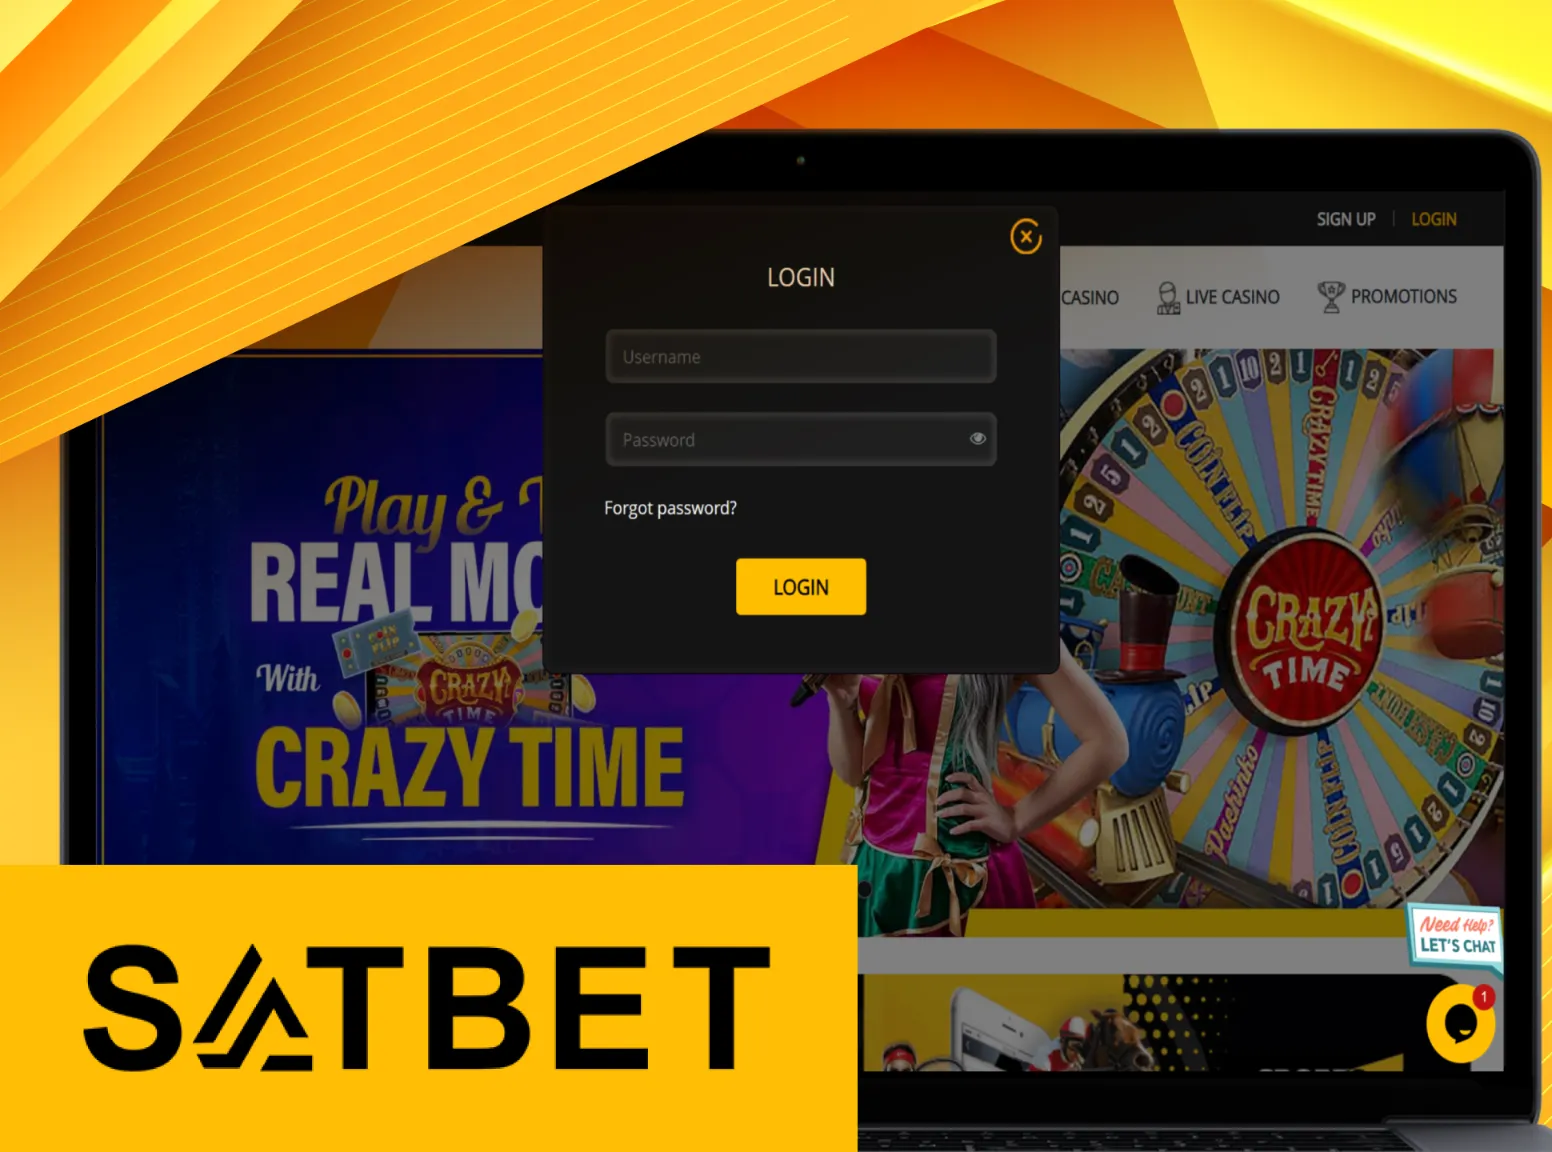 Use your Satbet account for logging in.